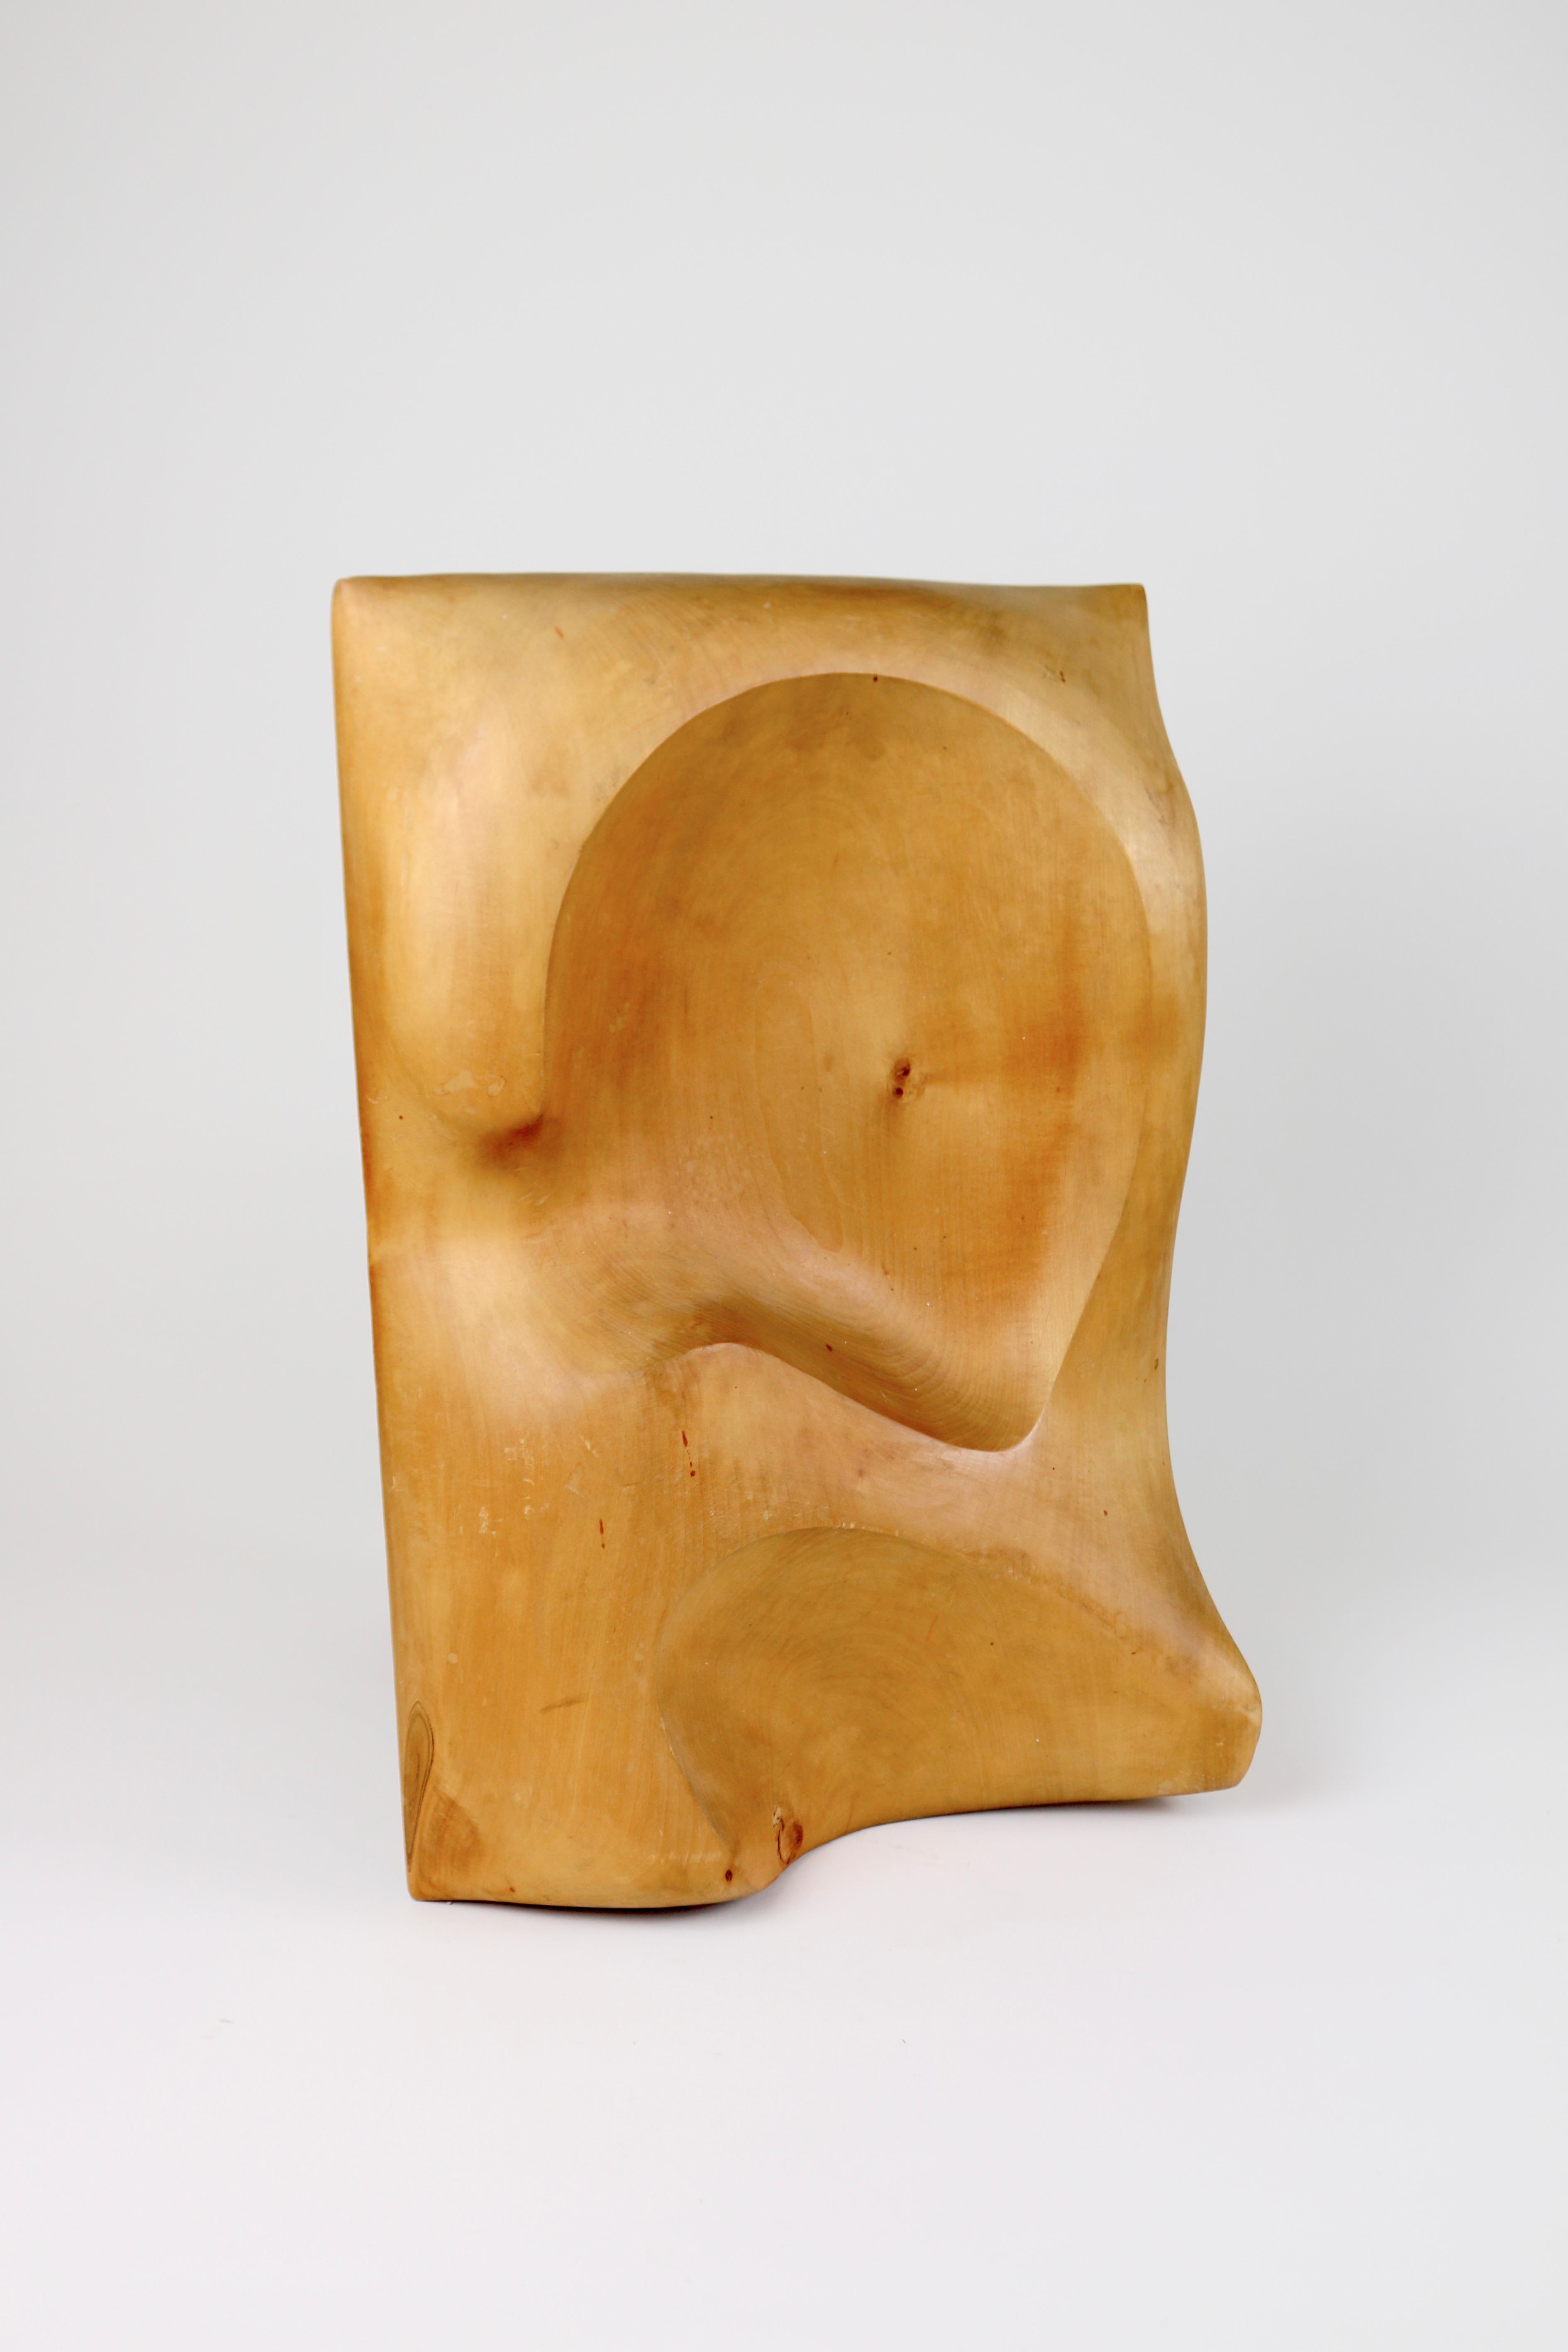 A wall-hung carving by hobbyist Dutch sculptor Bill Pÿl.

Signed to the back and dated 1981. Hook at the back for hanging.